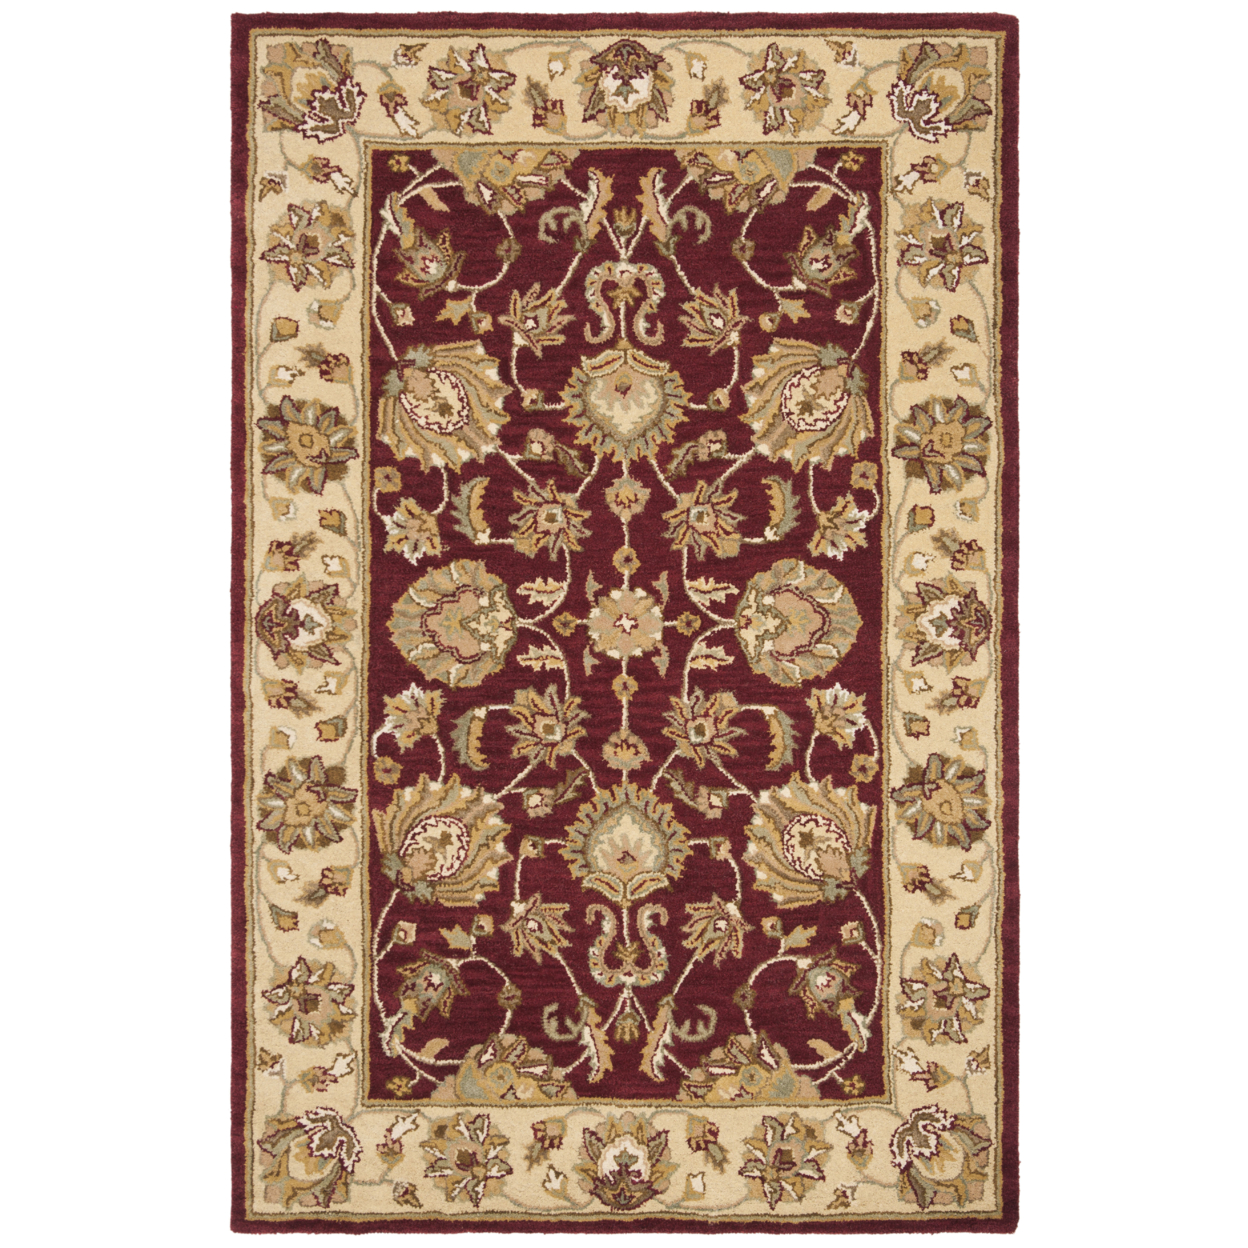 SAFAVIEH Heritage Regis Traditional Wool Area Rug, Red/Gold, 7'6" x 9'6" Oval - image 1 of 9